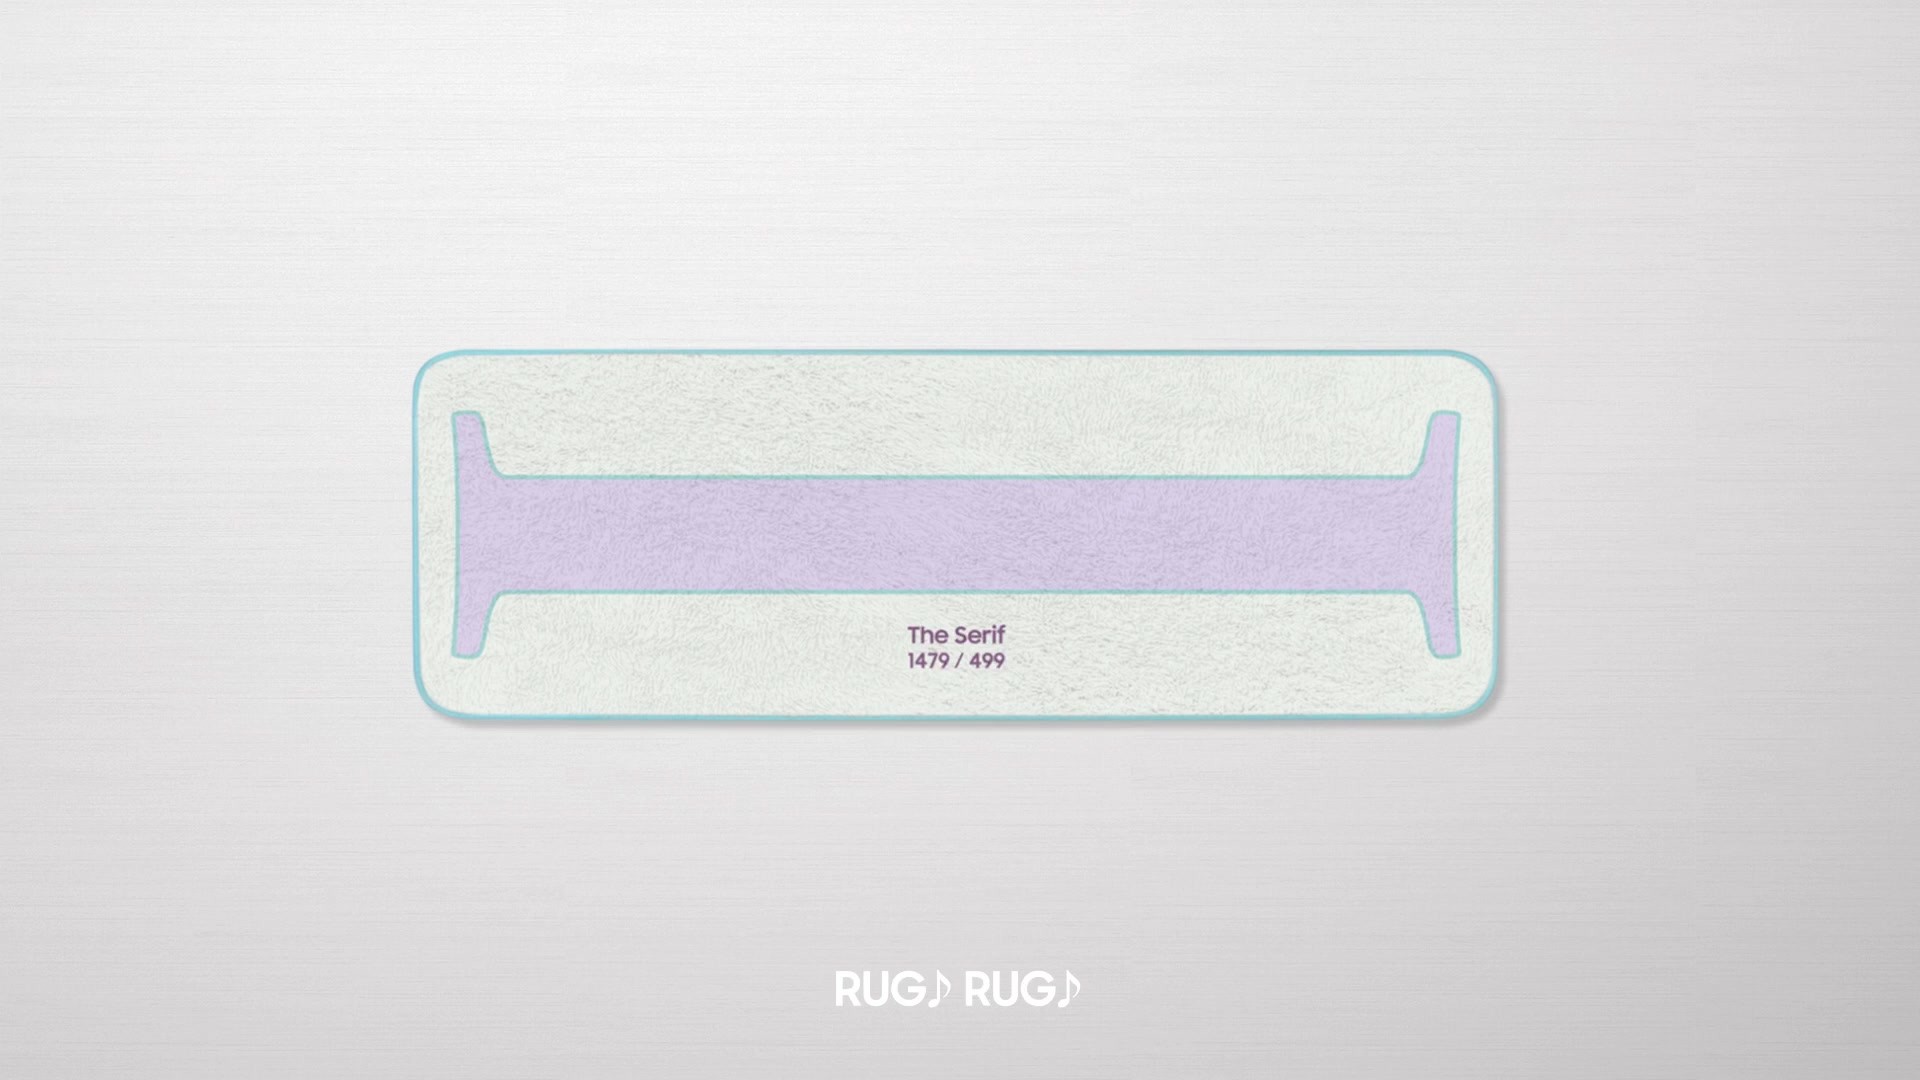 All you need is a rug